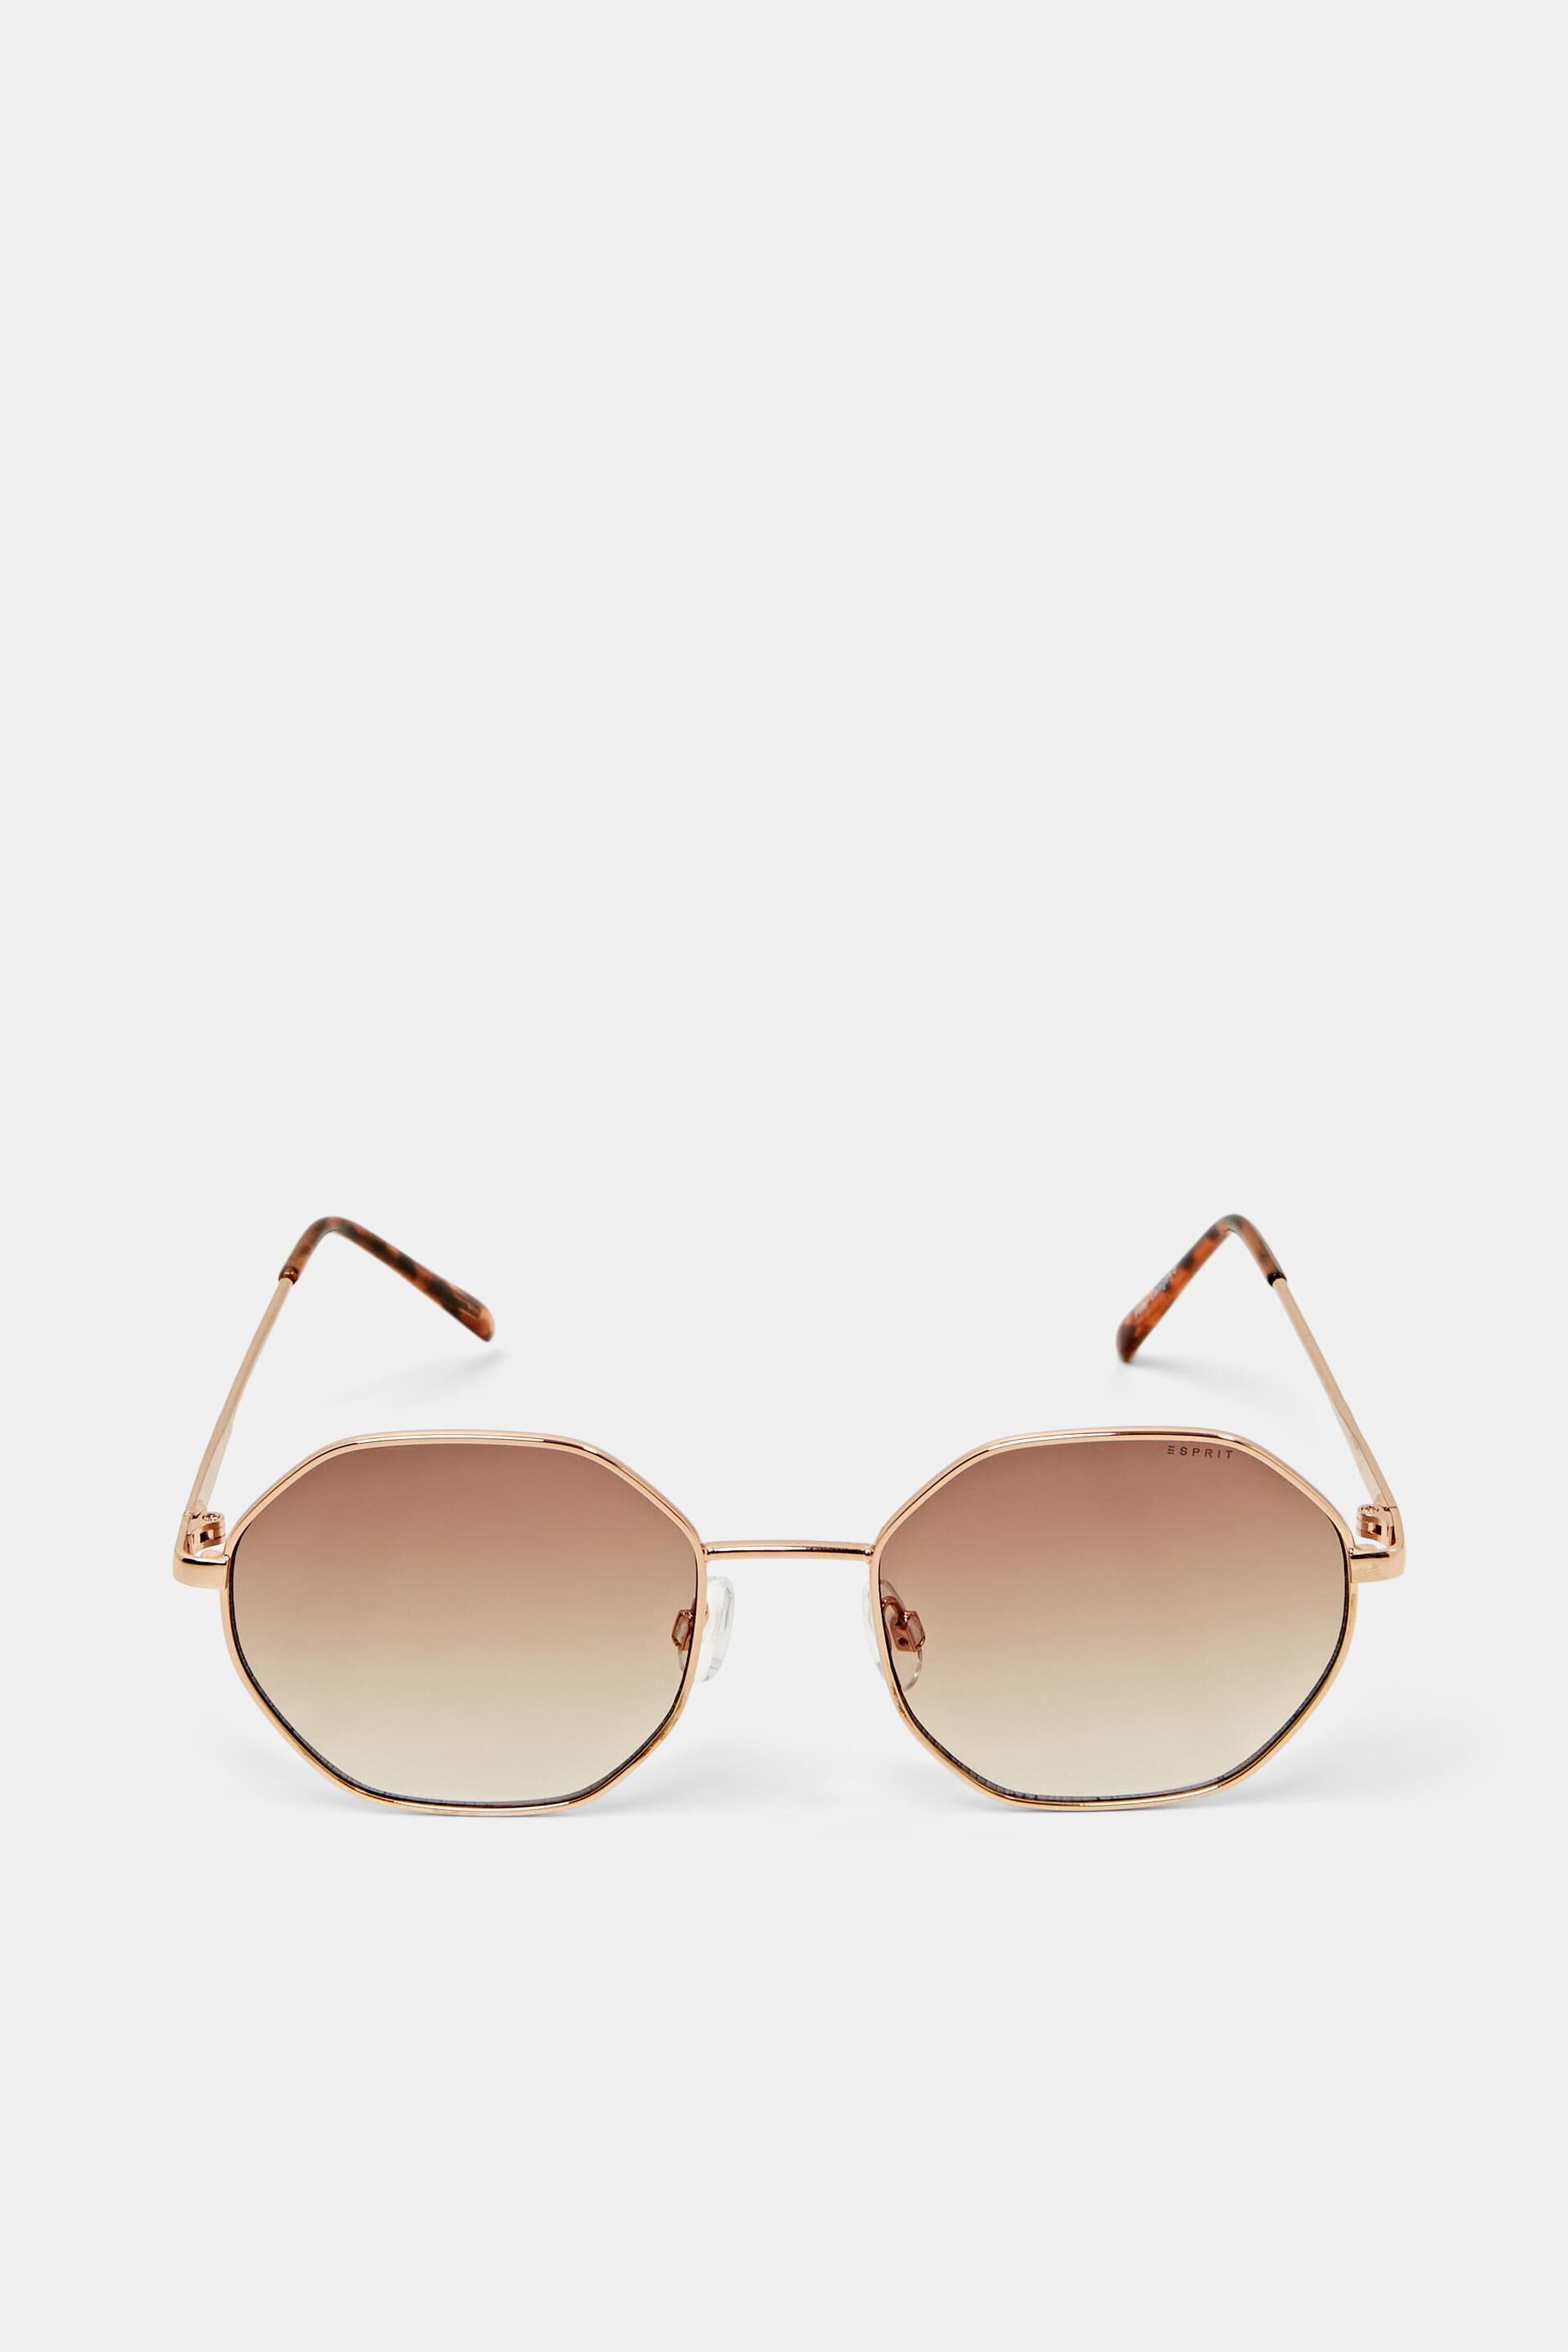 Esprit Online Store Sunglasses with filigree gold metal frame